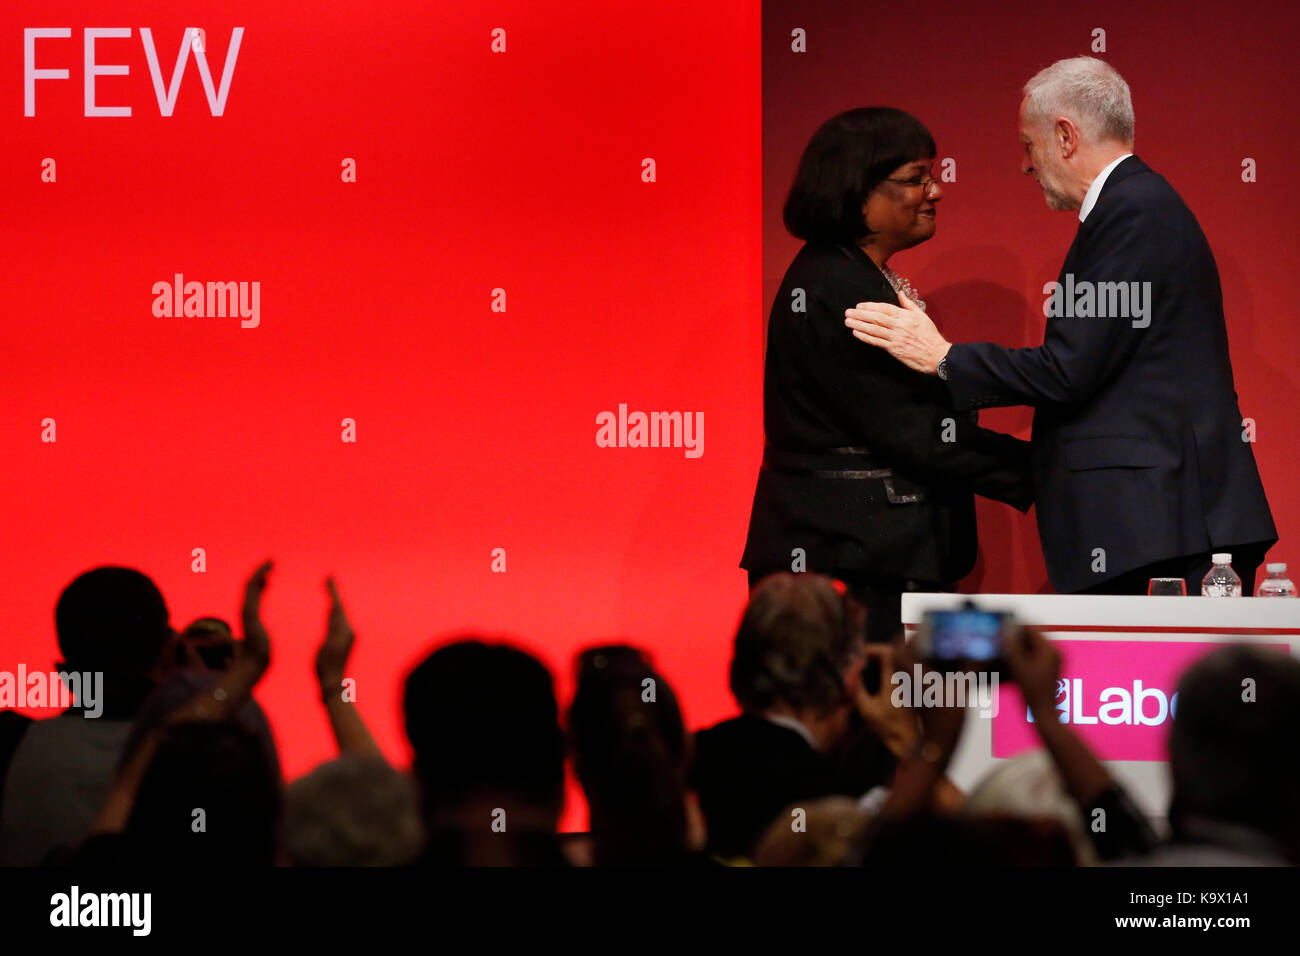 Brighton, UK. 24th September, 2017. Jeremy Corbyn, leader of Britain's opposition Labour party congratulates Diane Abbott, Shadow Home Secretary, after her speech during the annual Labour Party Conference in Brighton, UK Sunday, September 24, 2017. Photograph : Credit: Luke MacGregor/Alamy Live News Stock Photo